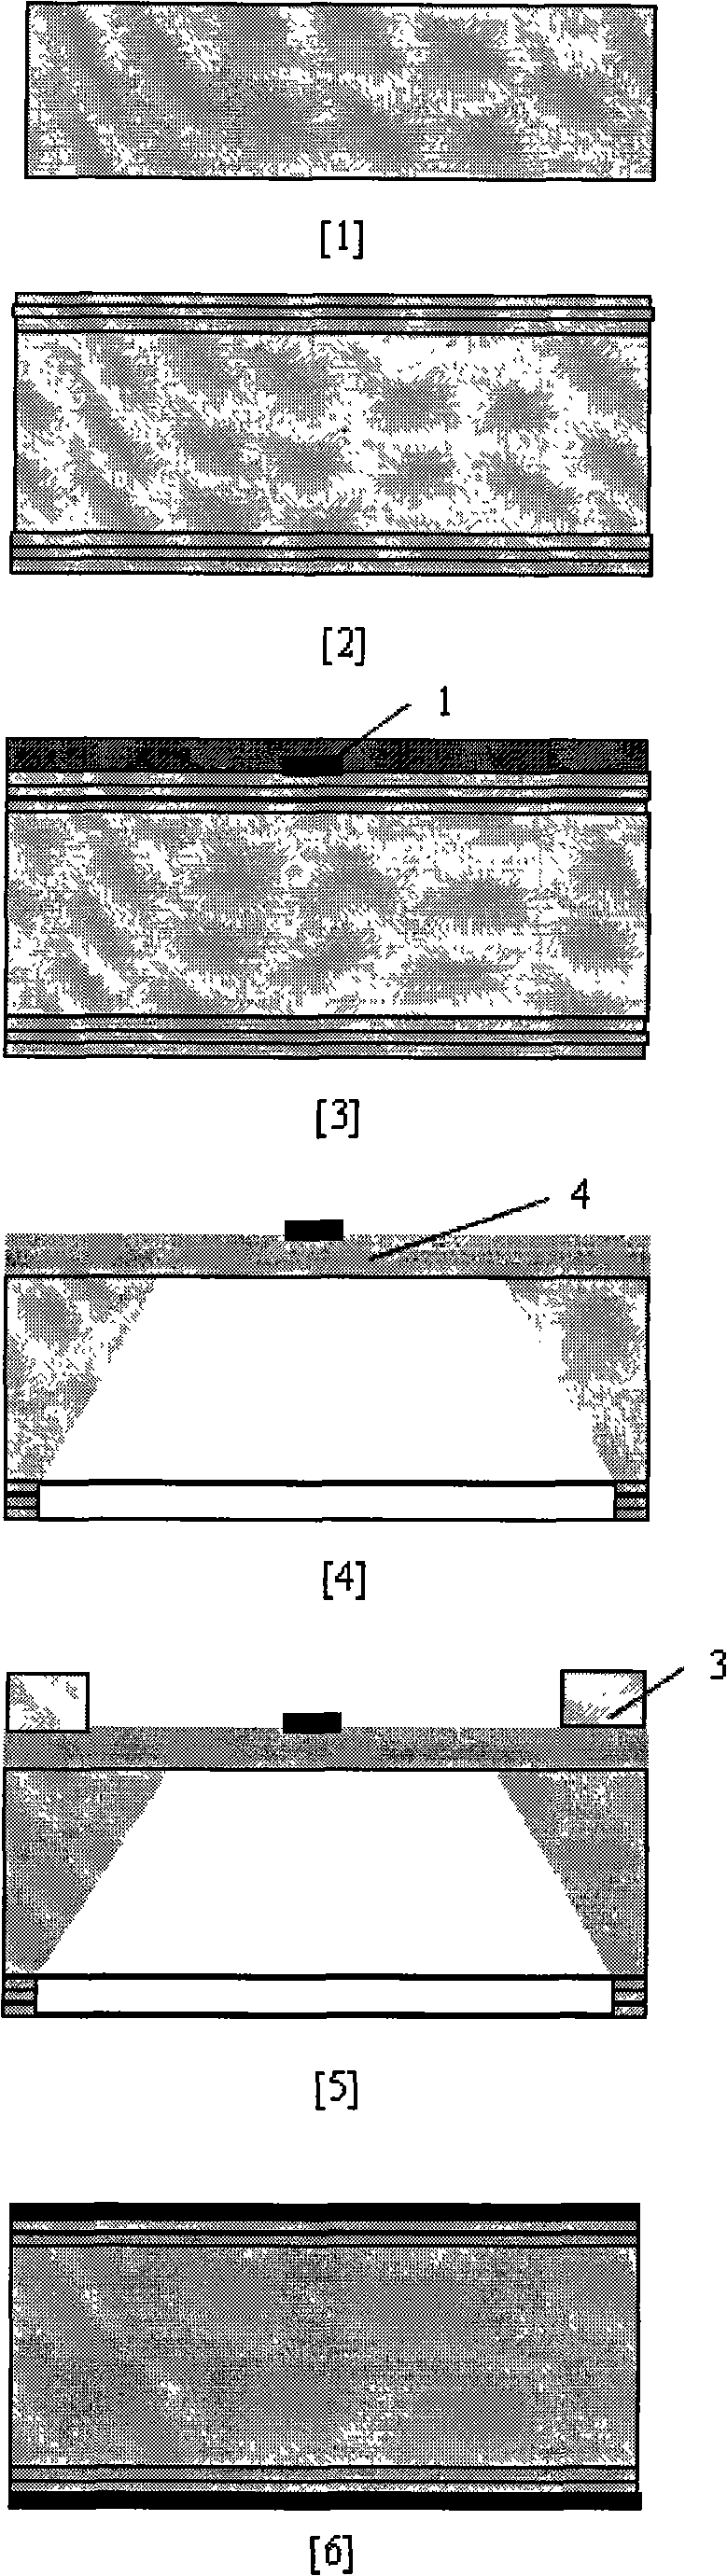 Structure of film thermoelectric converter based on bi-material microcantilevel and fabricating method thereof